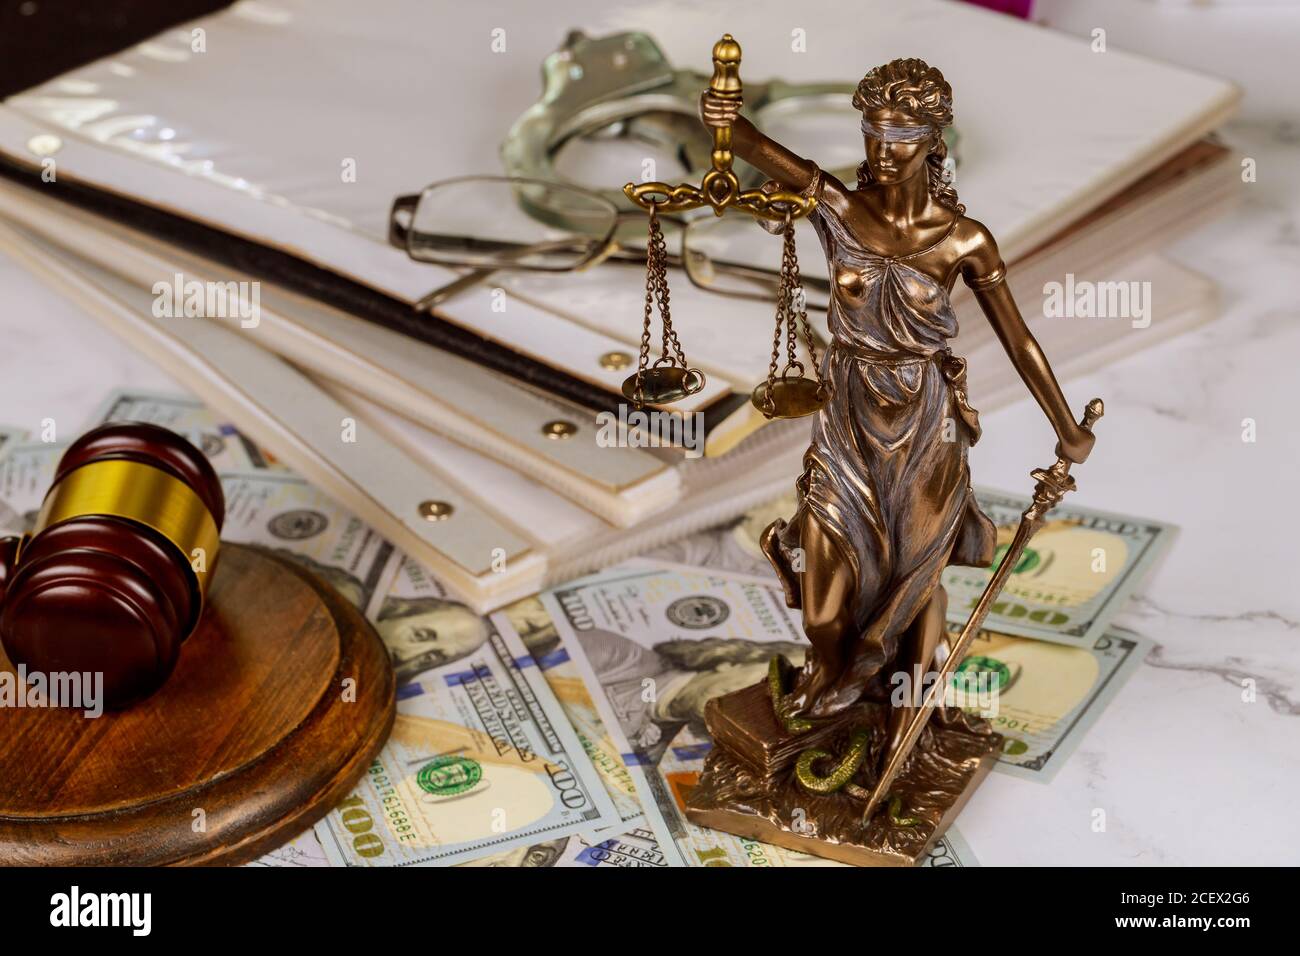 Legislation office statue of justice symbol on workplace law document with Judge's gavel police handcuffs Stock Photo